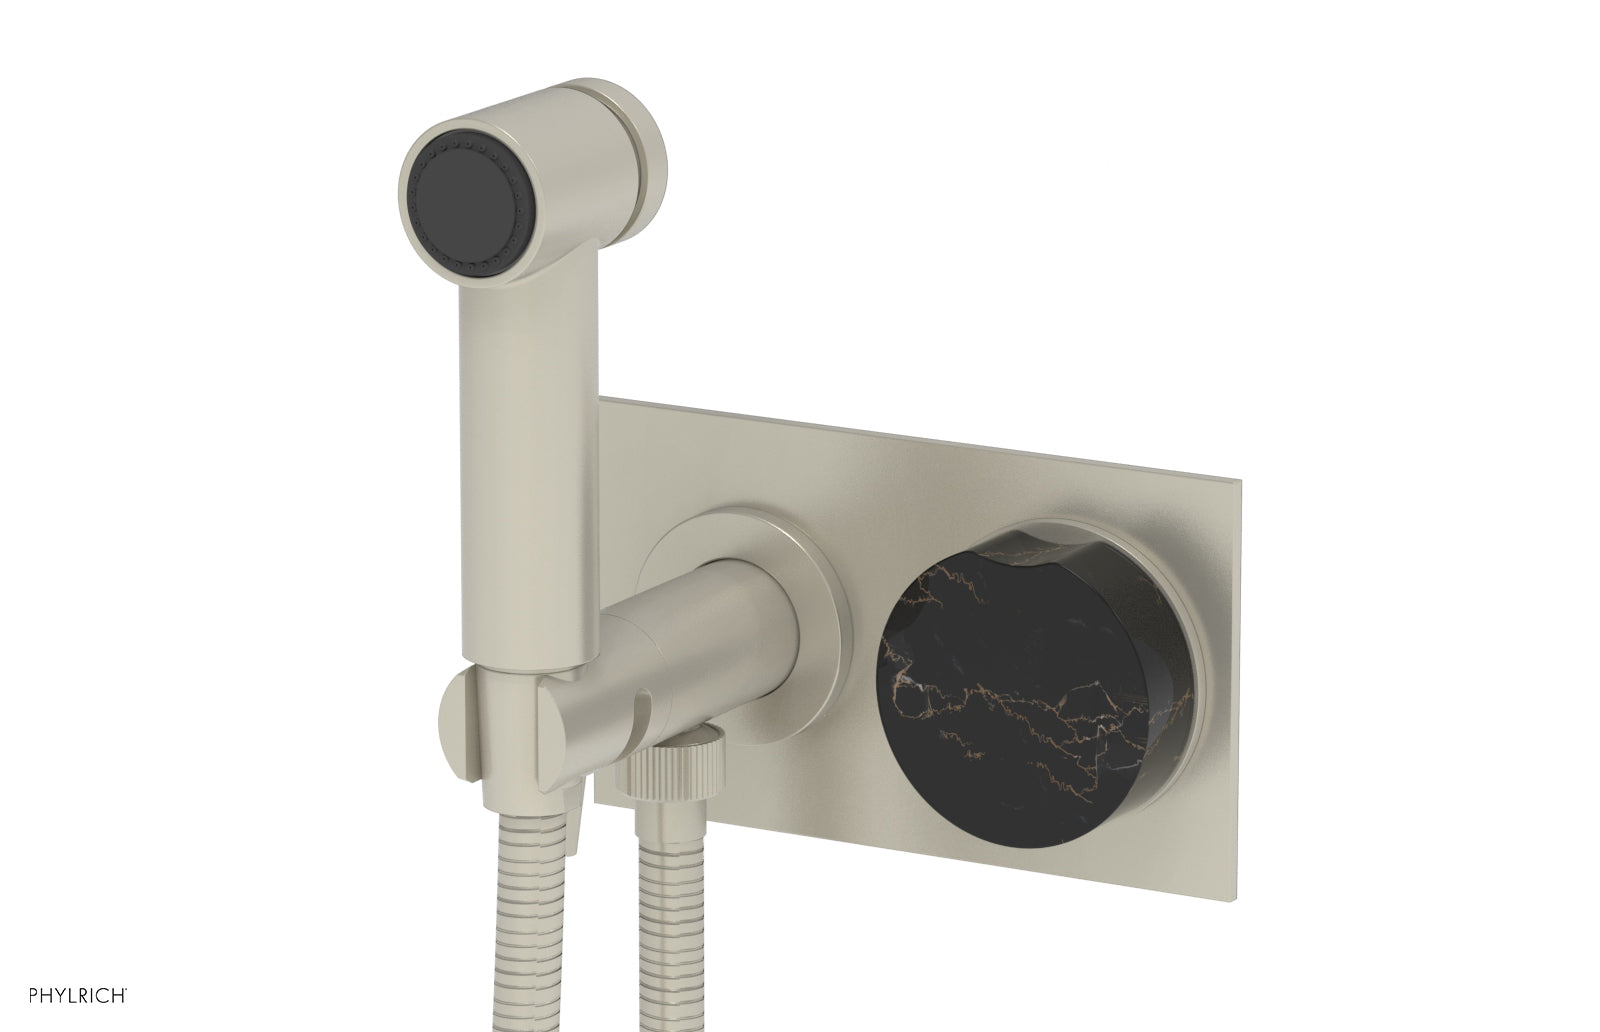 Phylrich CIRC Wall Mounted Bidet, Black Marble Handle